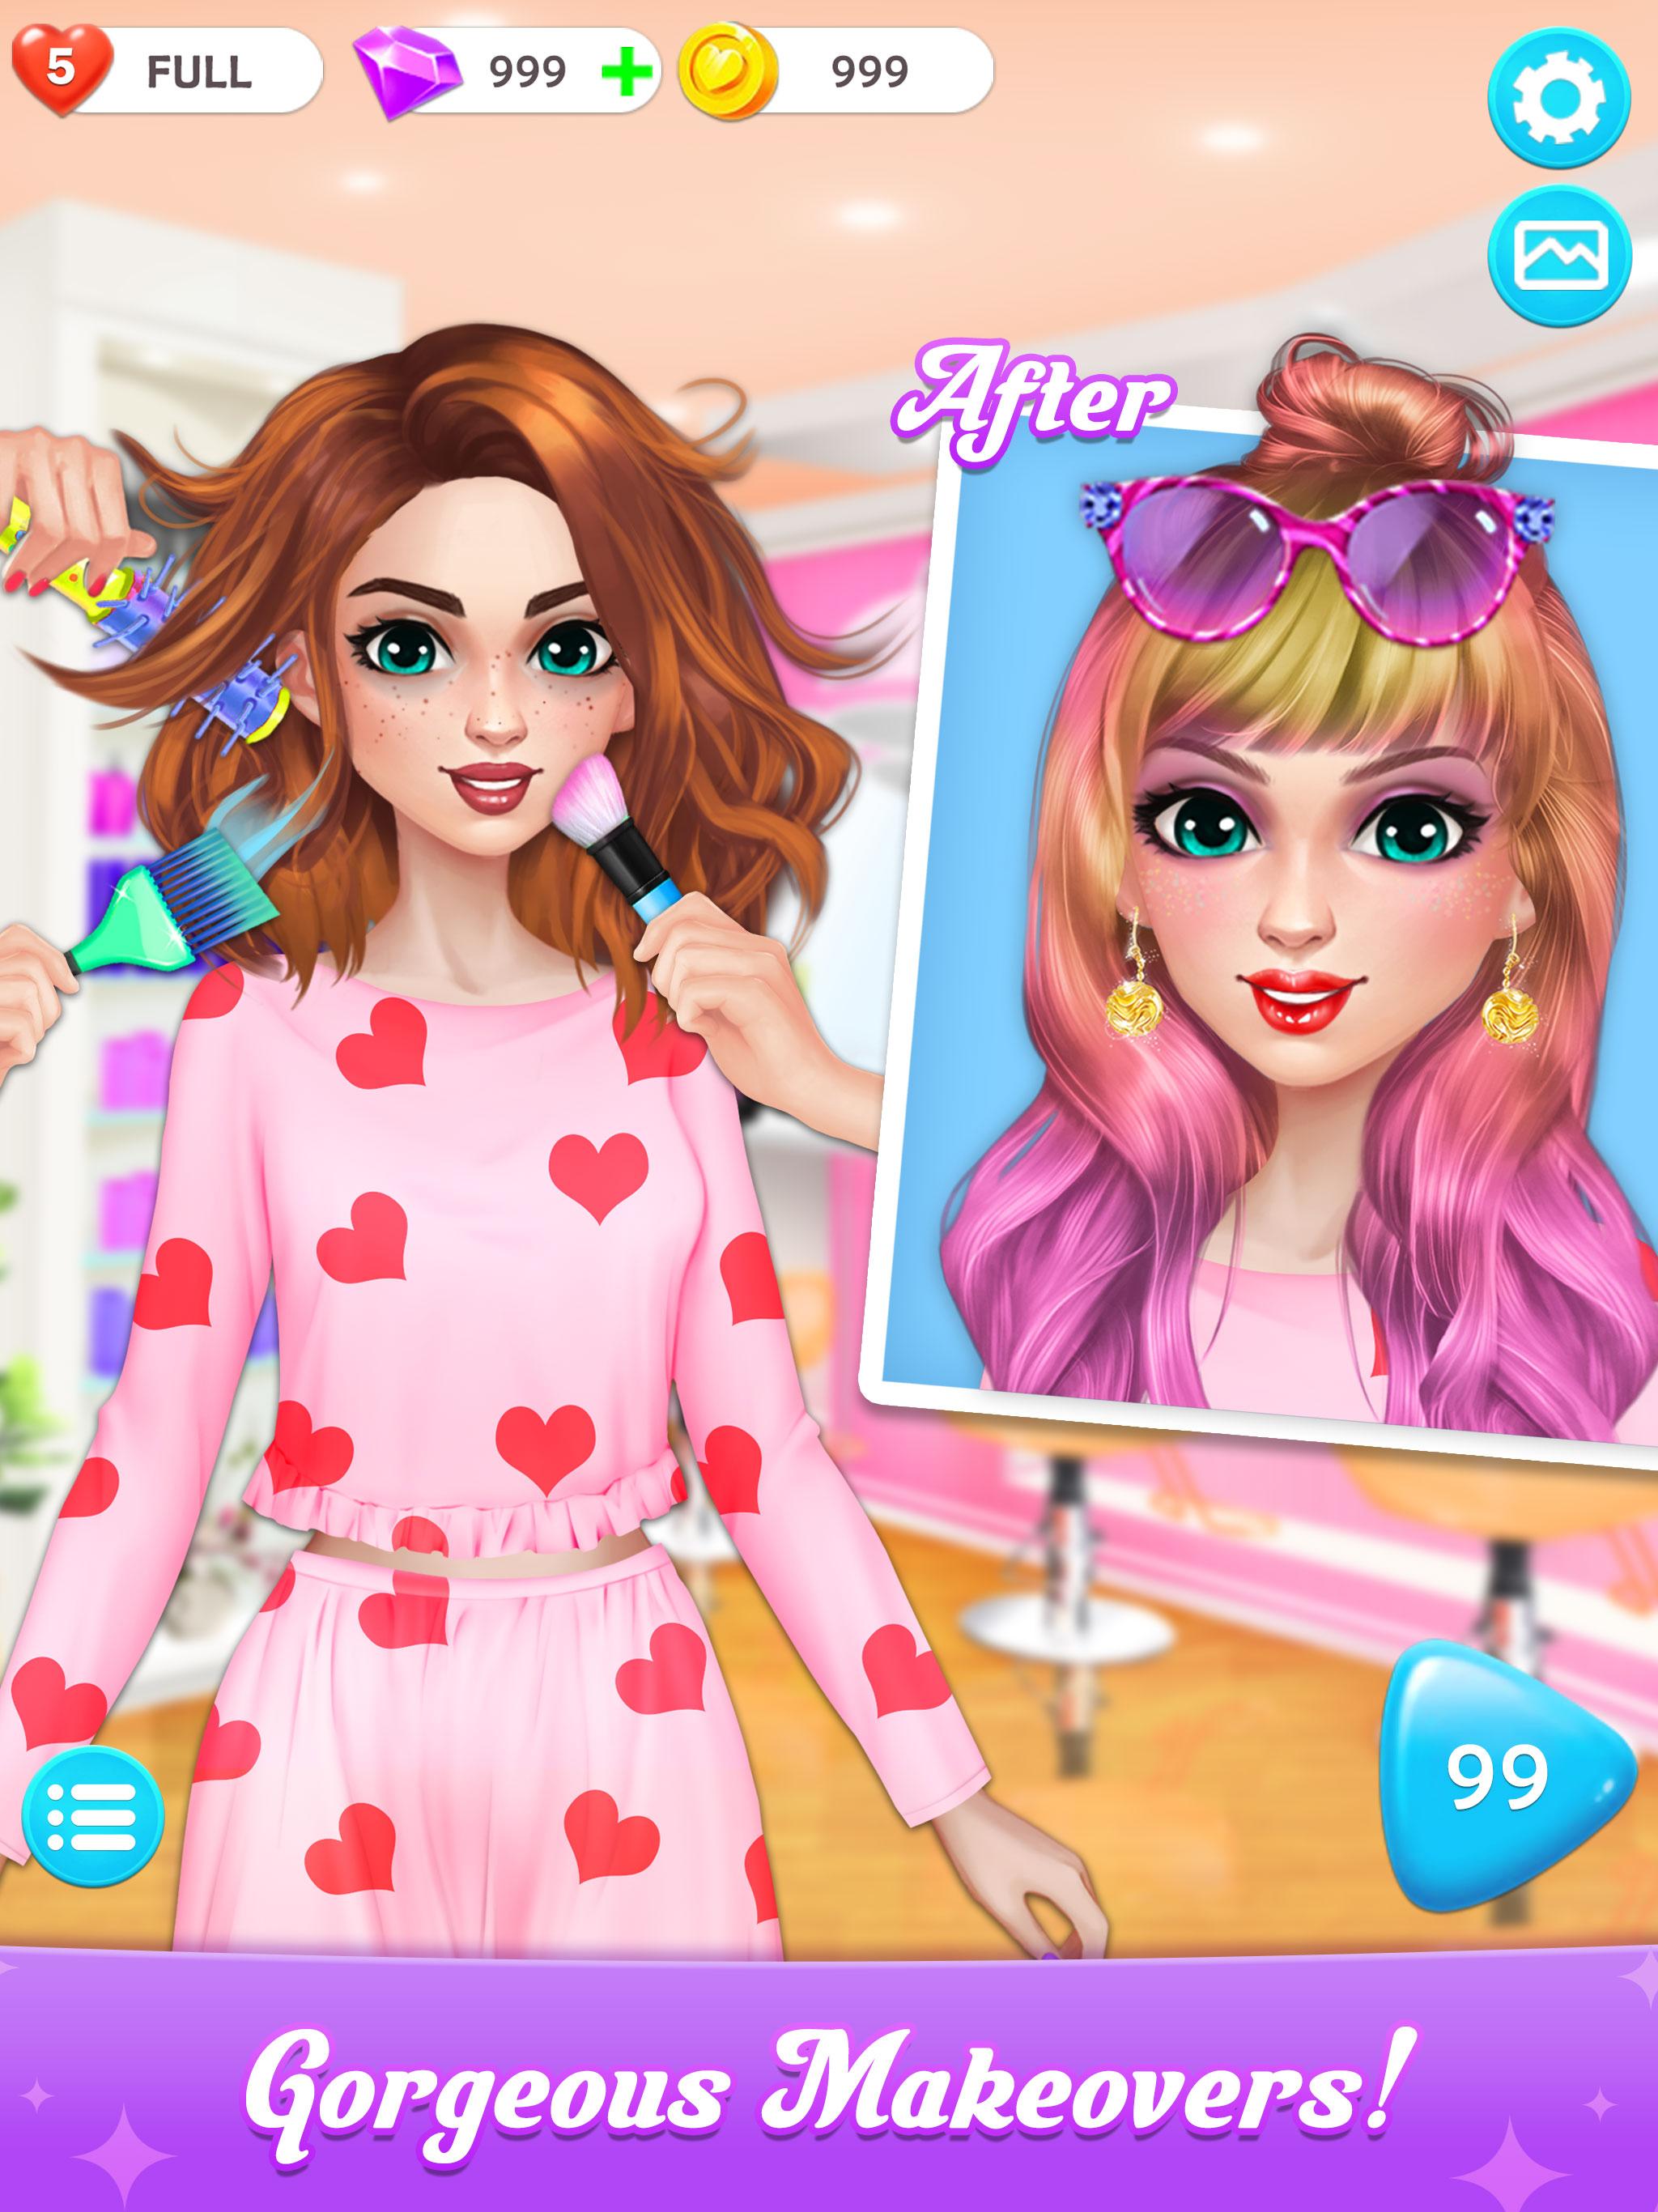 Project Makeup: Makeover Story Games for Girls para Android - APK Baixar